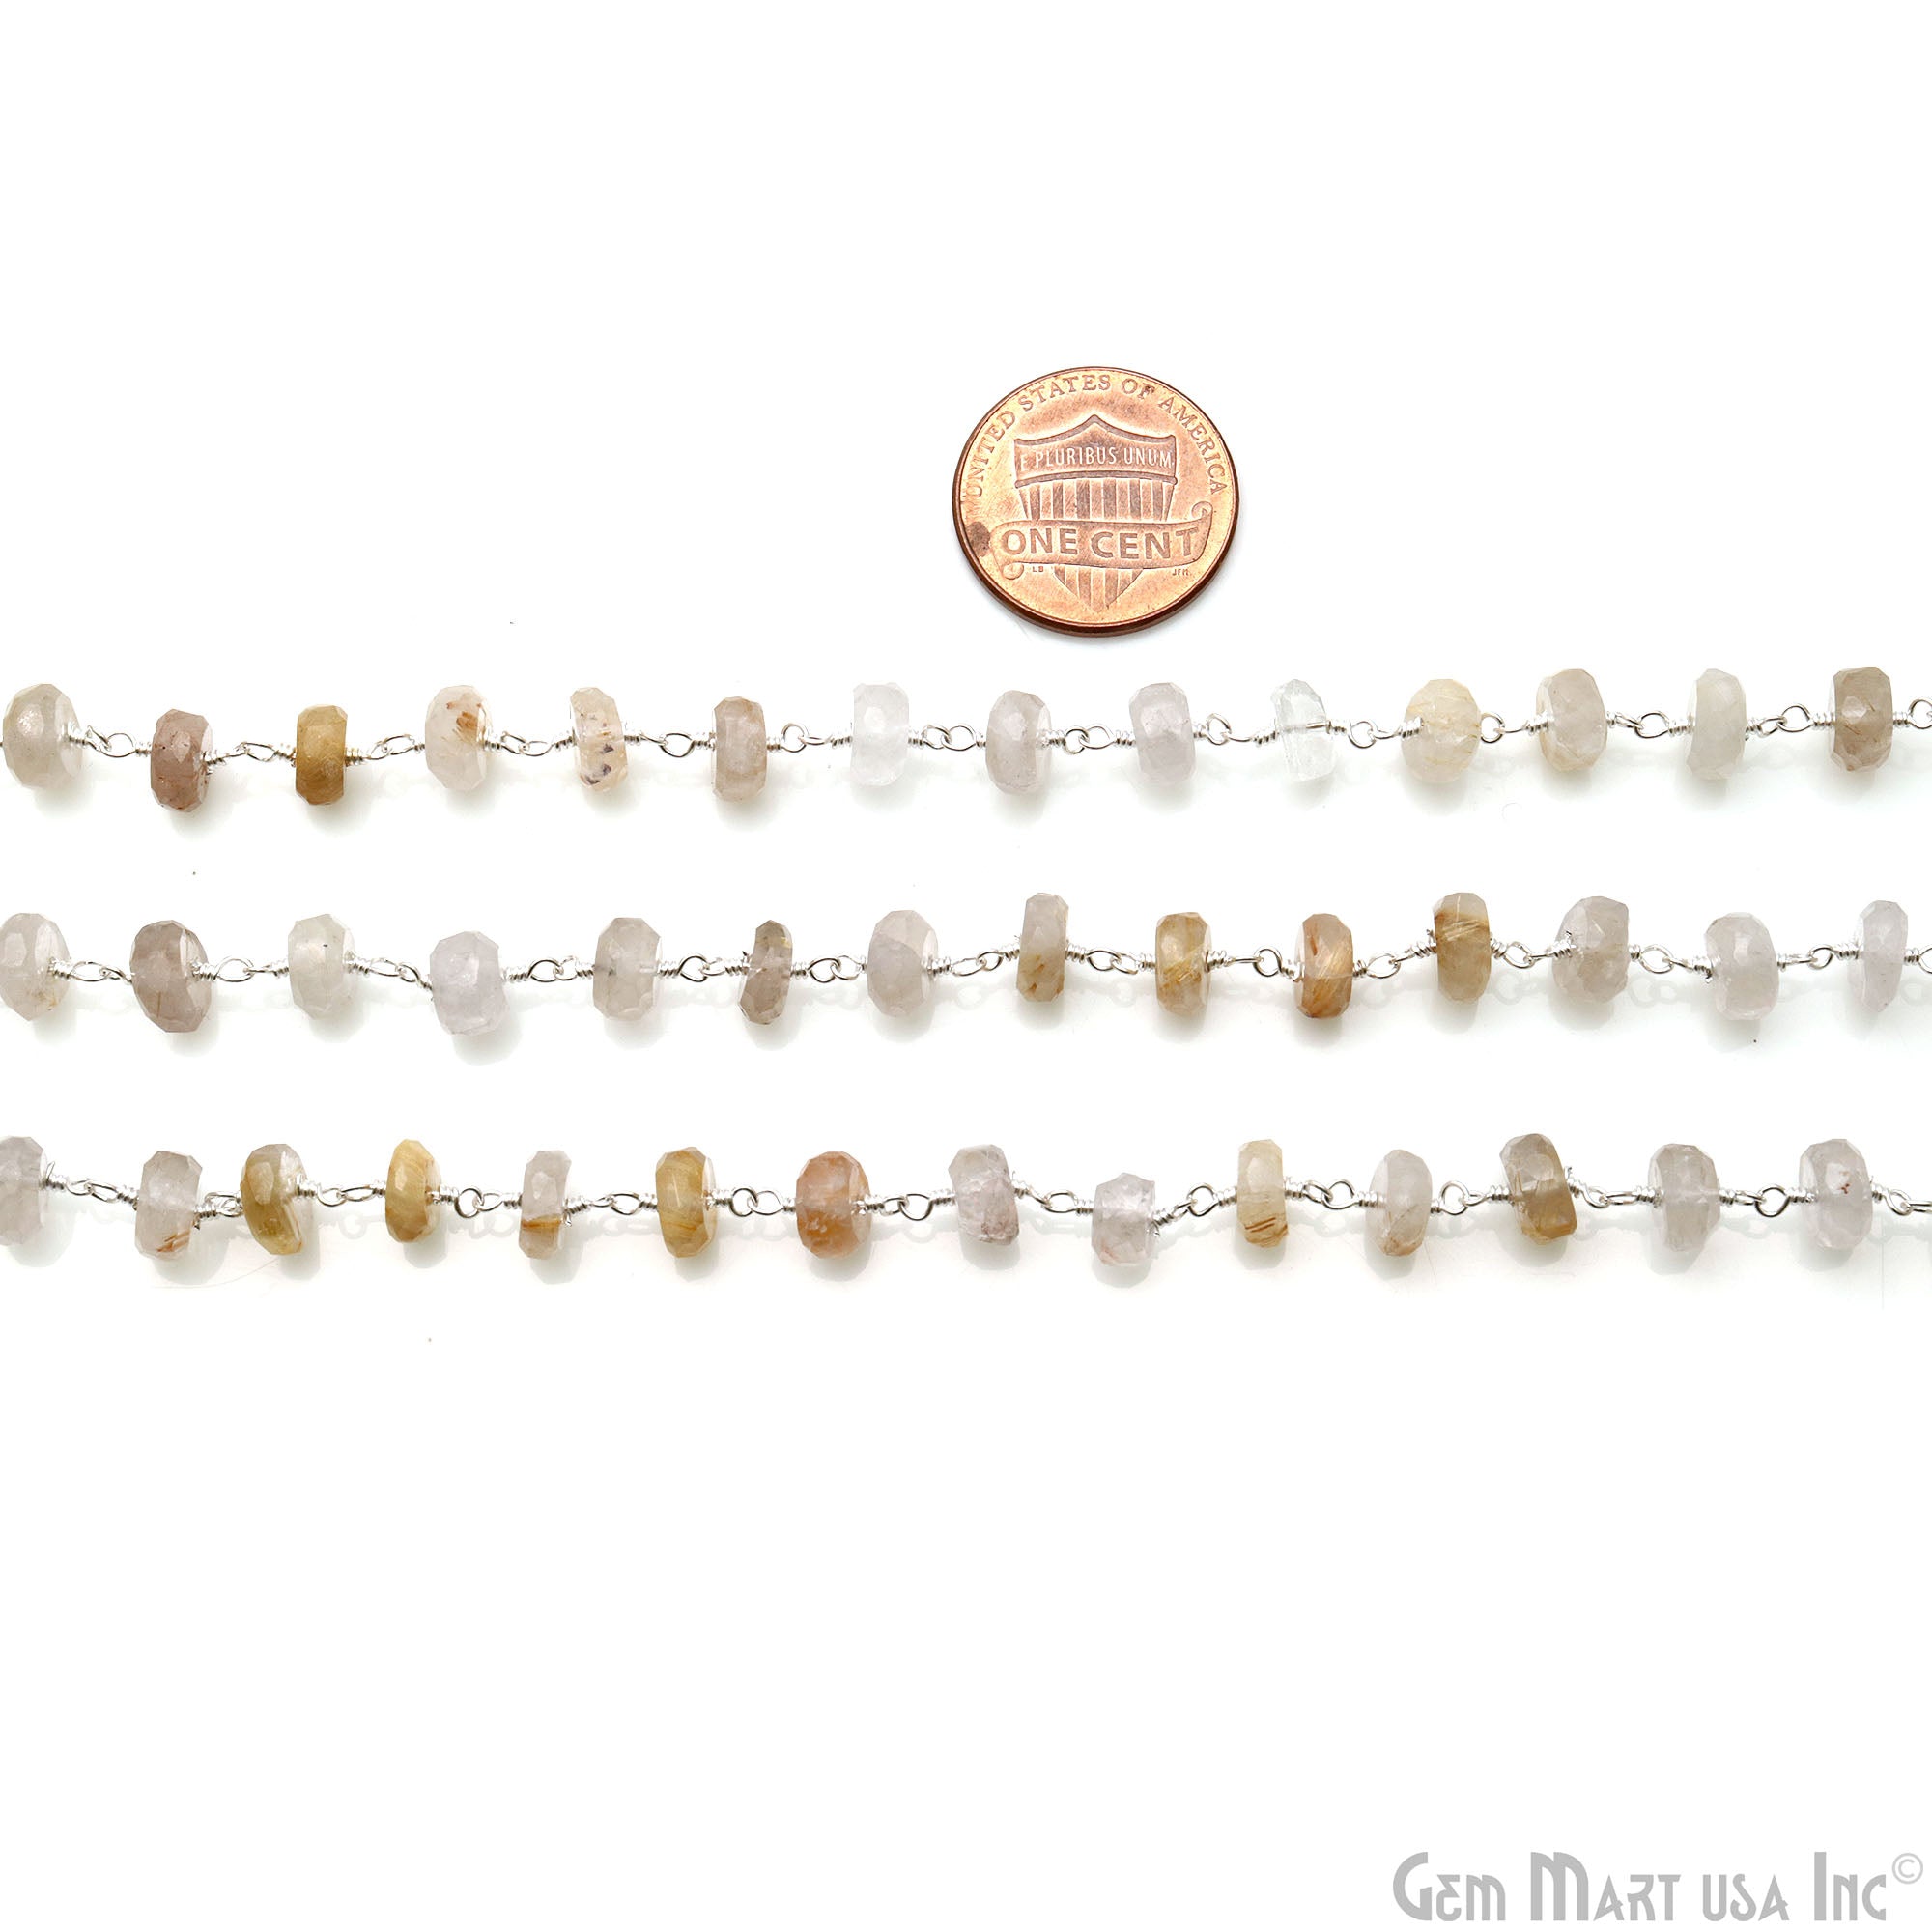 Golden Rutile Faceted Beads 6-7mm Silver Wire Wrapped Rosary Chain